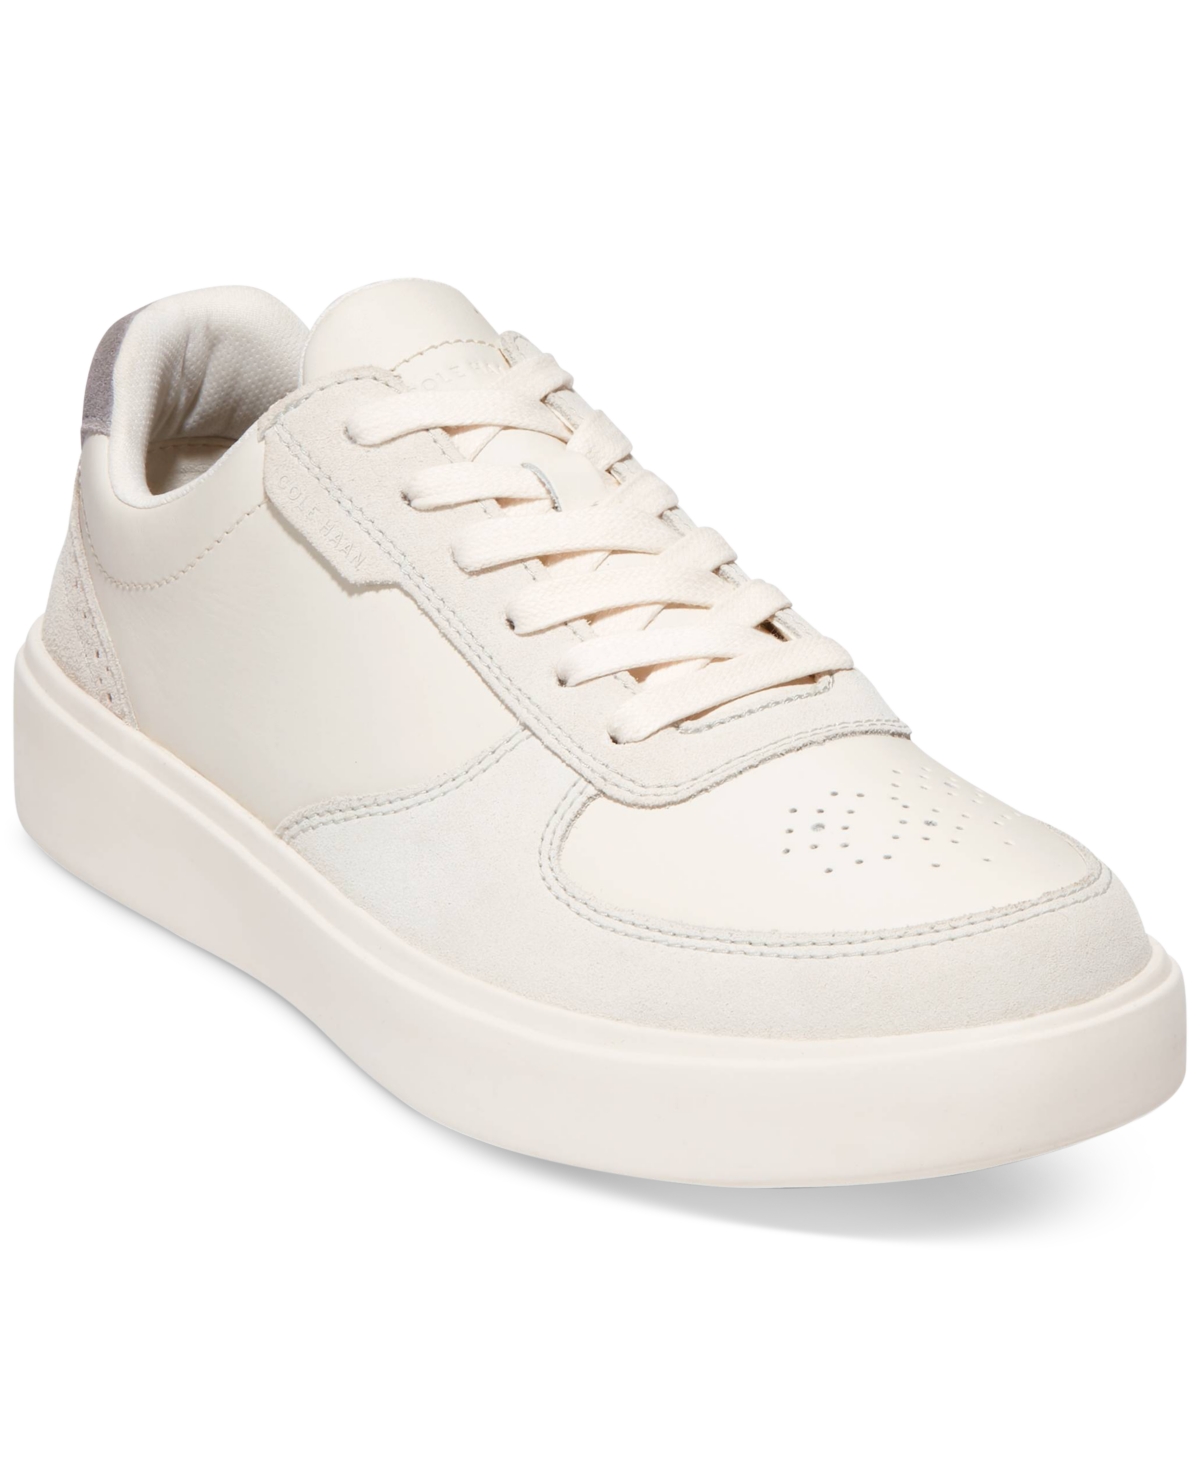 Cole Haan Men's Grand Crosscourt Transition Lace-up Sneakers In Ivory,silver Birch,ivory